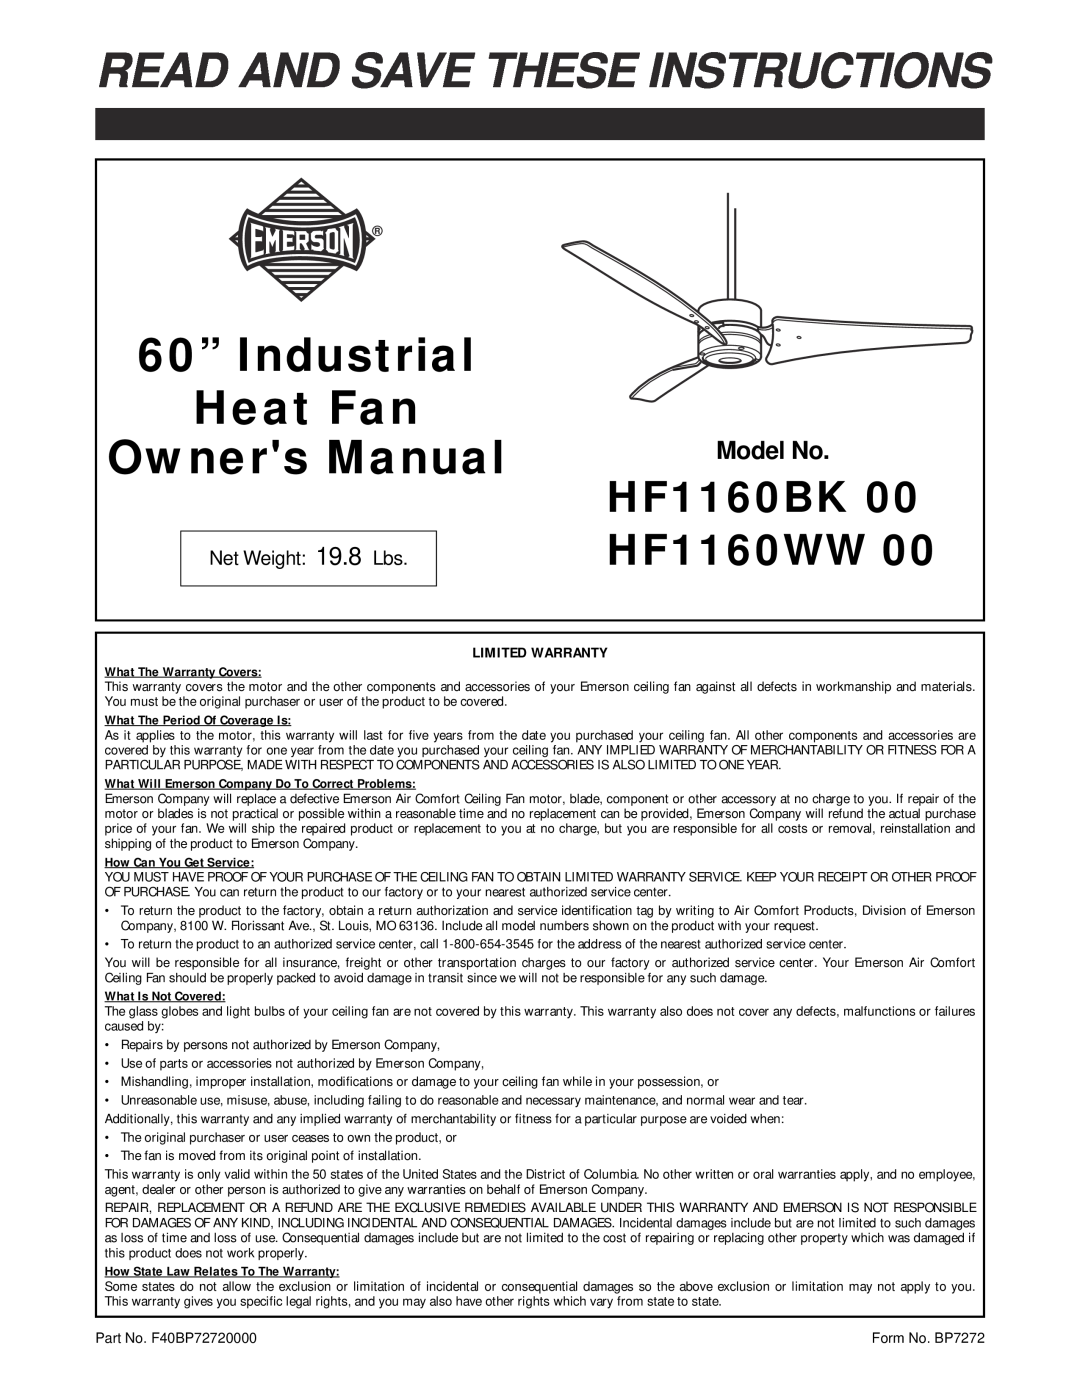 Emerson HF1160BK 00, HF1160WW 00 warranty Model No, Read And Save These Instructions, What The Warranty Covers 